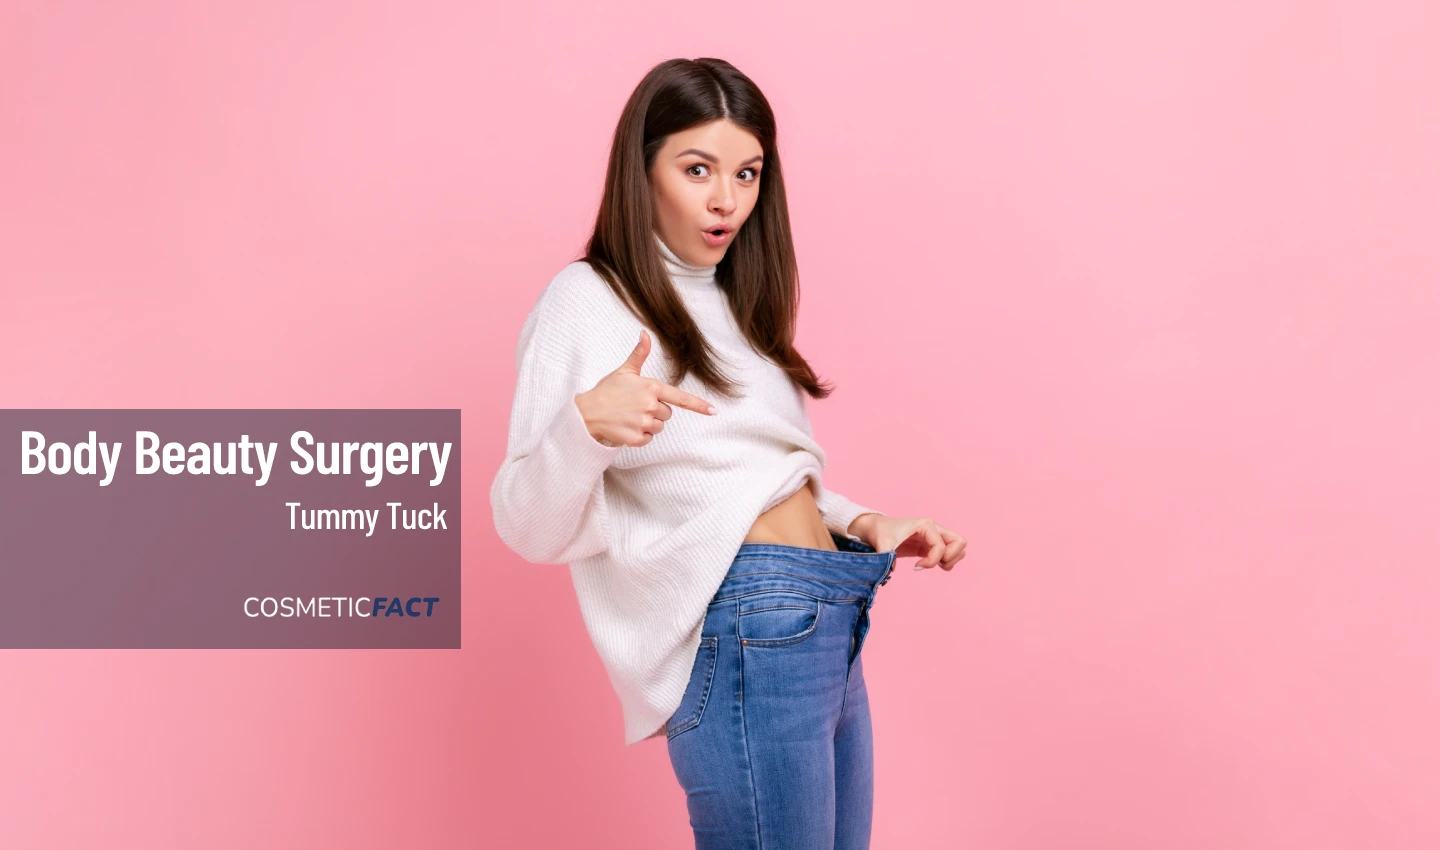 A woman with a beautiful style and body, displaying the results of tummy tuck surgery for achieving a flatter and firmer stomach.